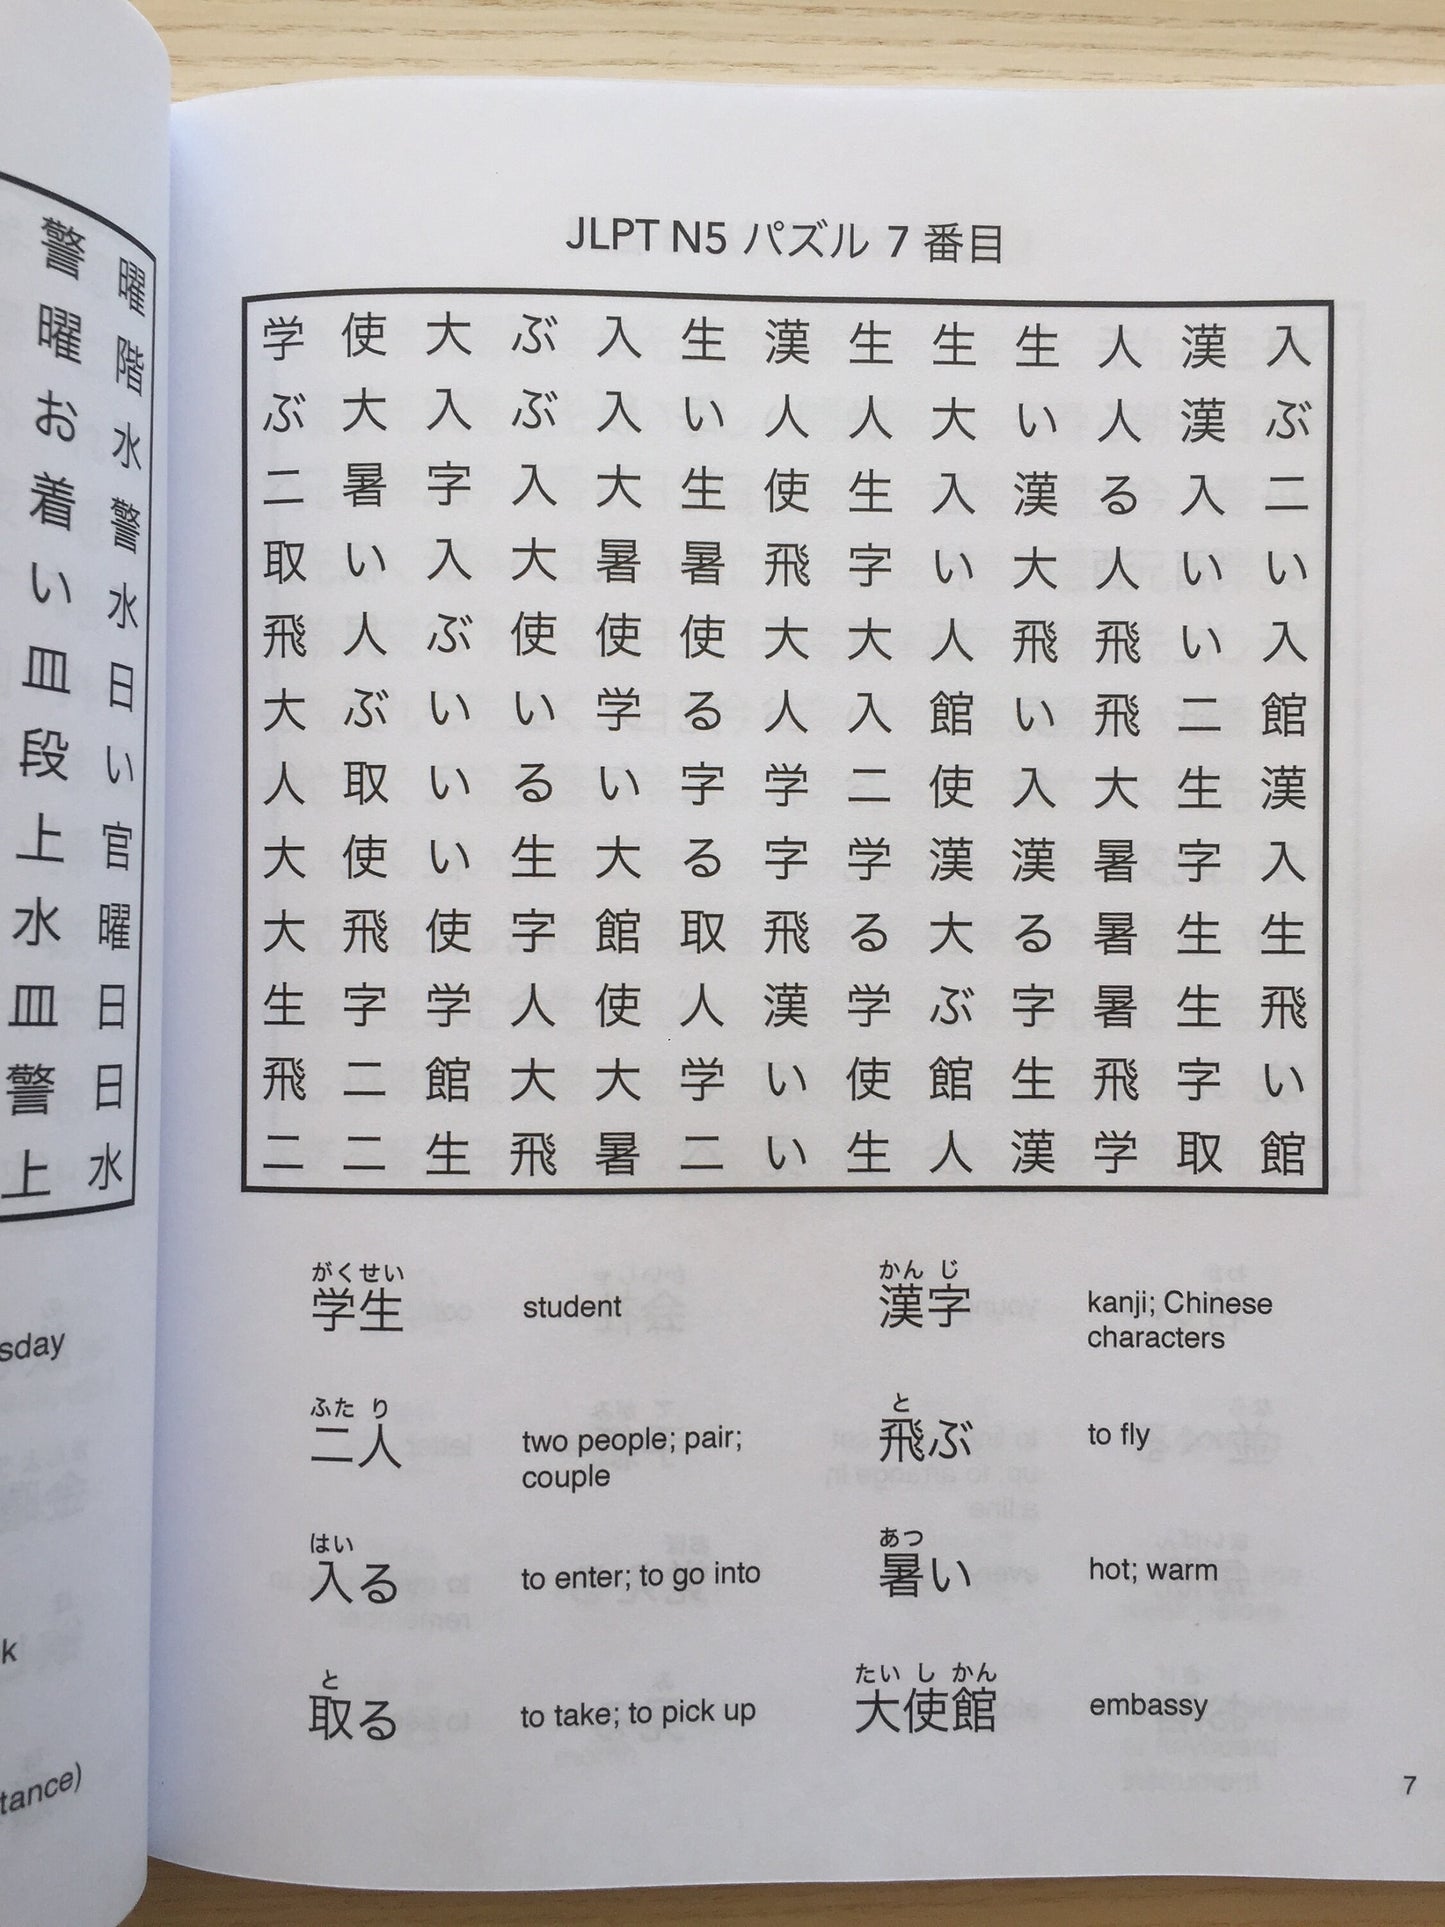 JLPT N3 Japanese Vocabulary Word Search: Kanji Reading Puzzles to Master the Japanese-Language Proficiency Test